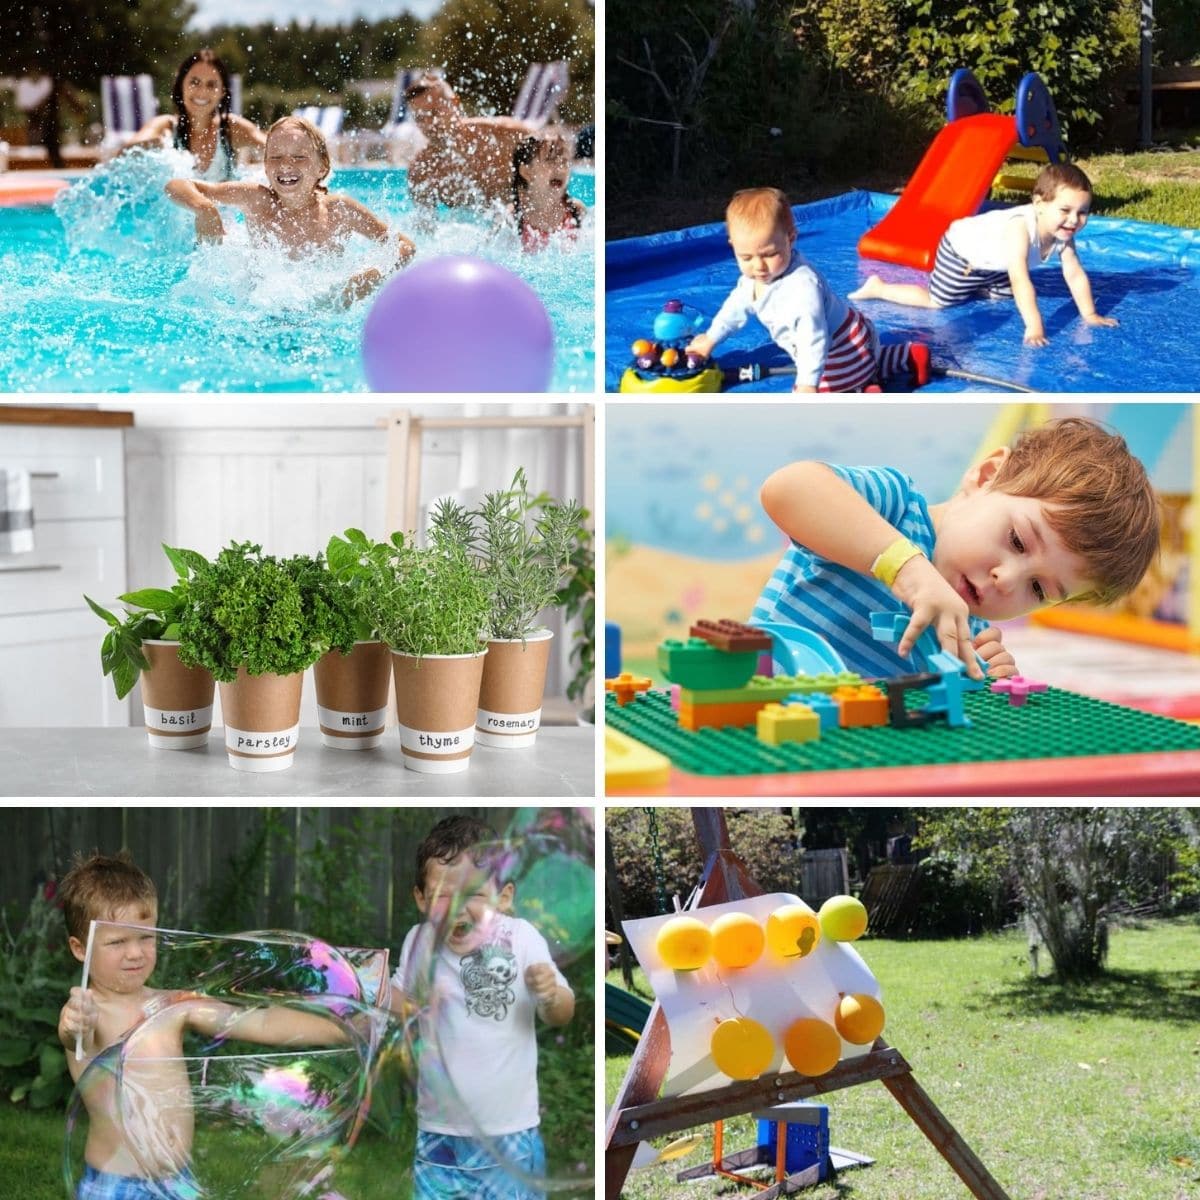 Collage of images of kids playing in summer.